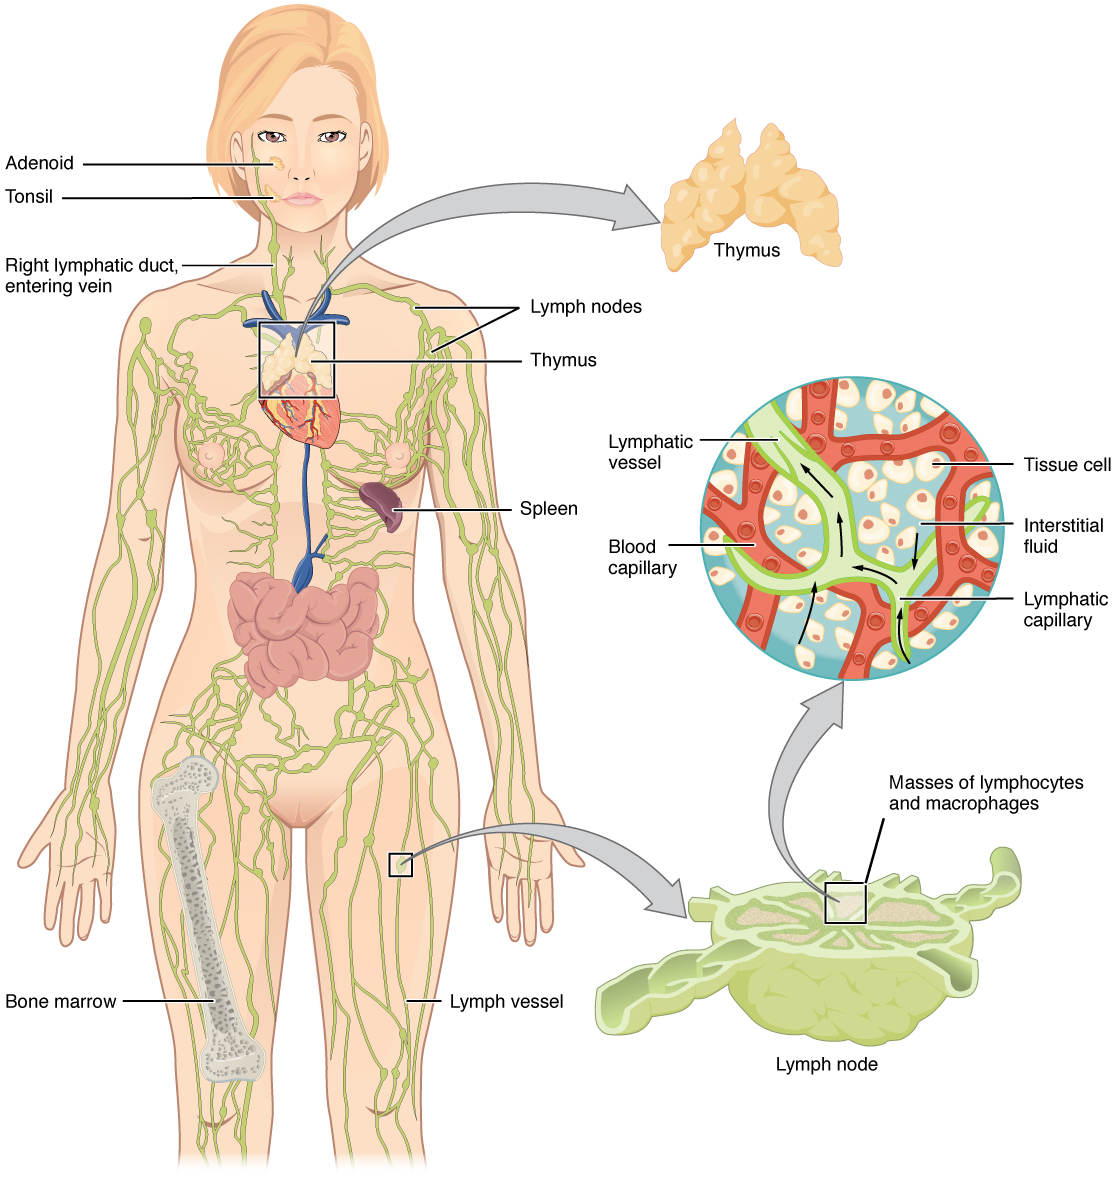 The left panel shows a female human body, and the entire lymphatic system is shown. The right panel shows magnified images of the thymus and the lymph node. All the major parts in the lymphatic system are labeled.